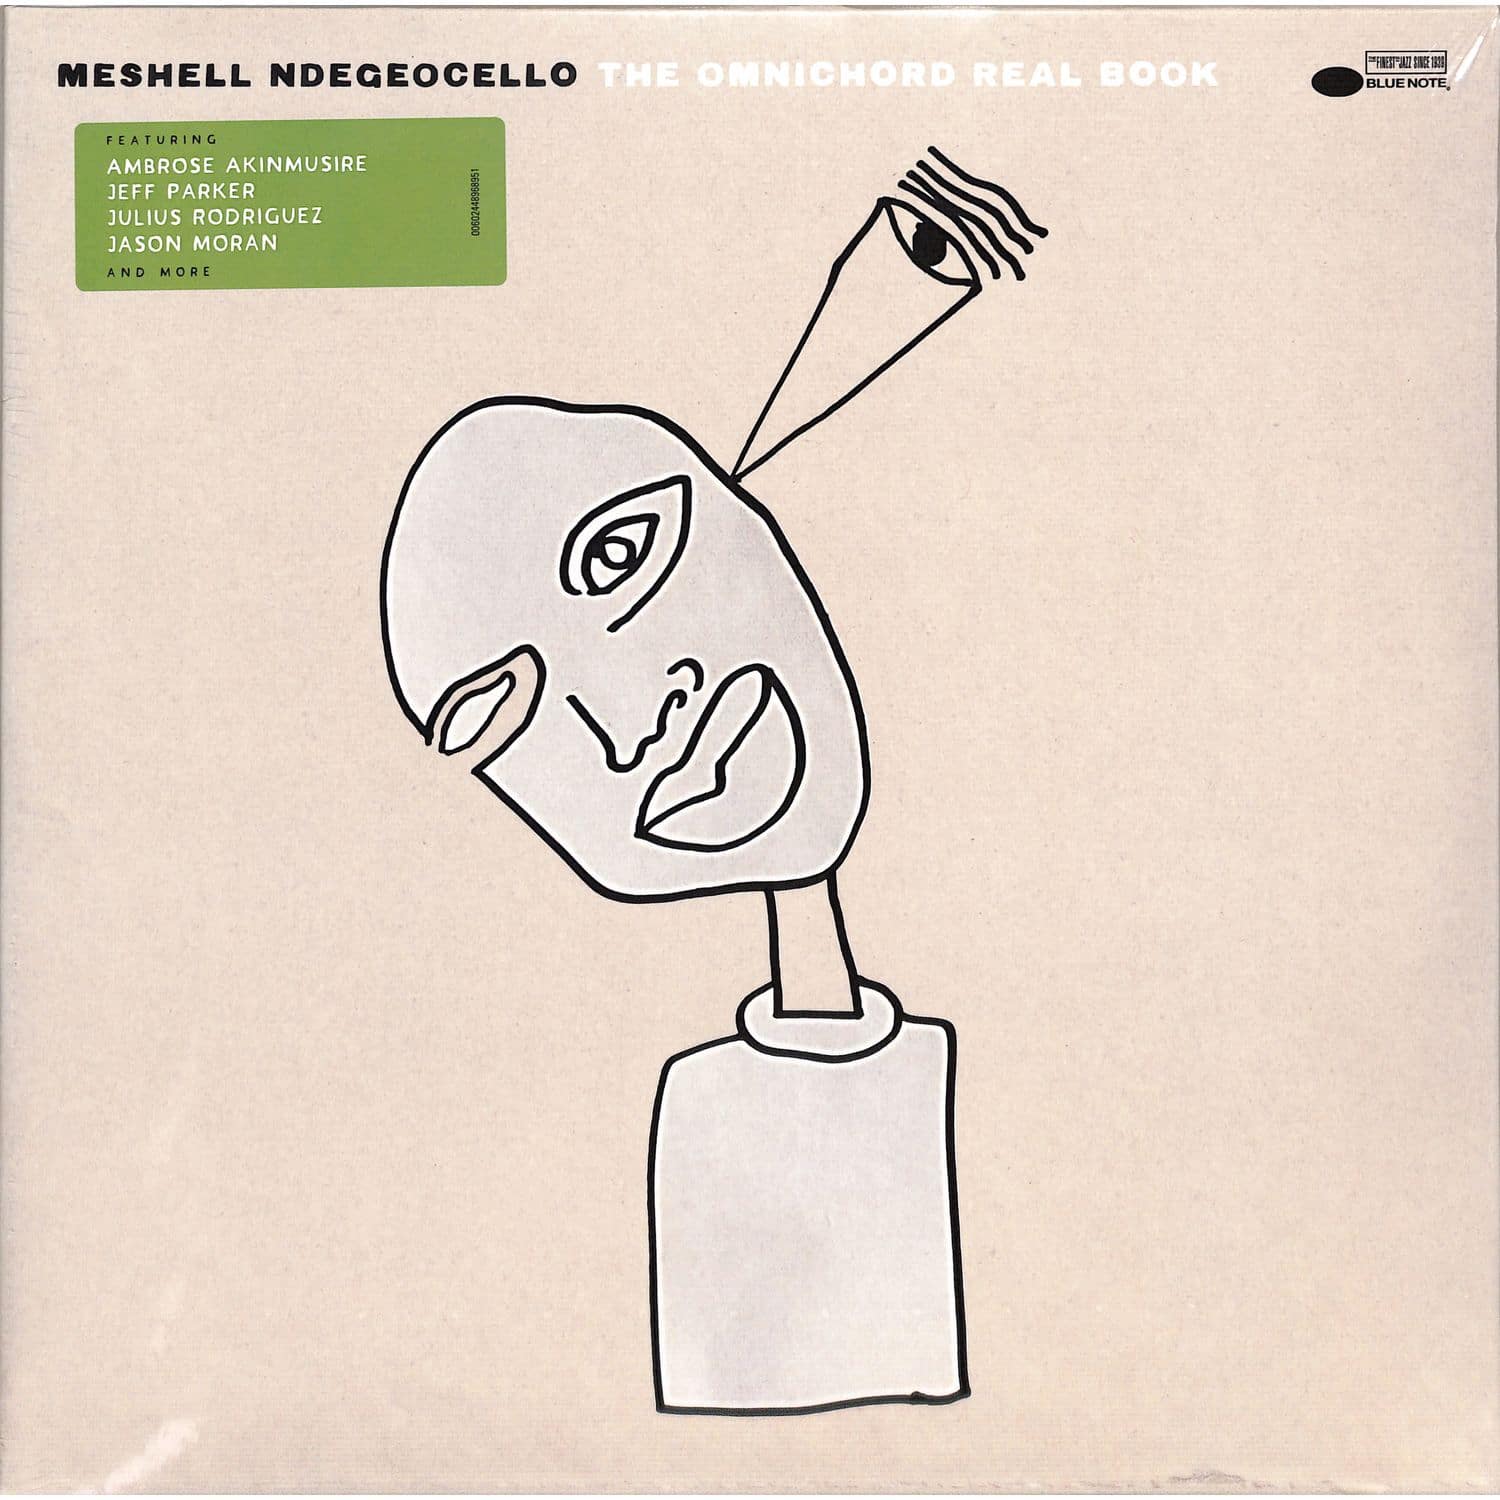 Meshell Ndegeocello - THE OMNICHORD REAL BOOK 